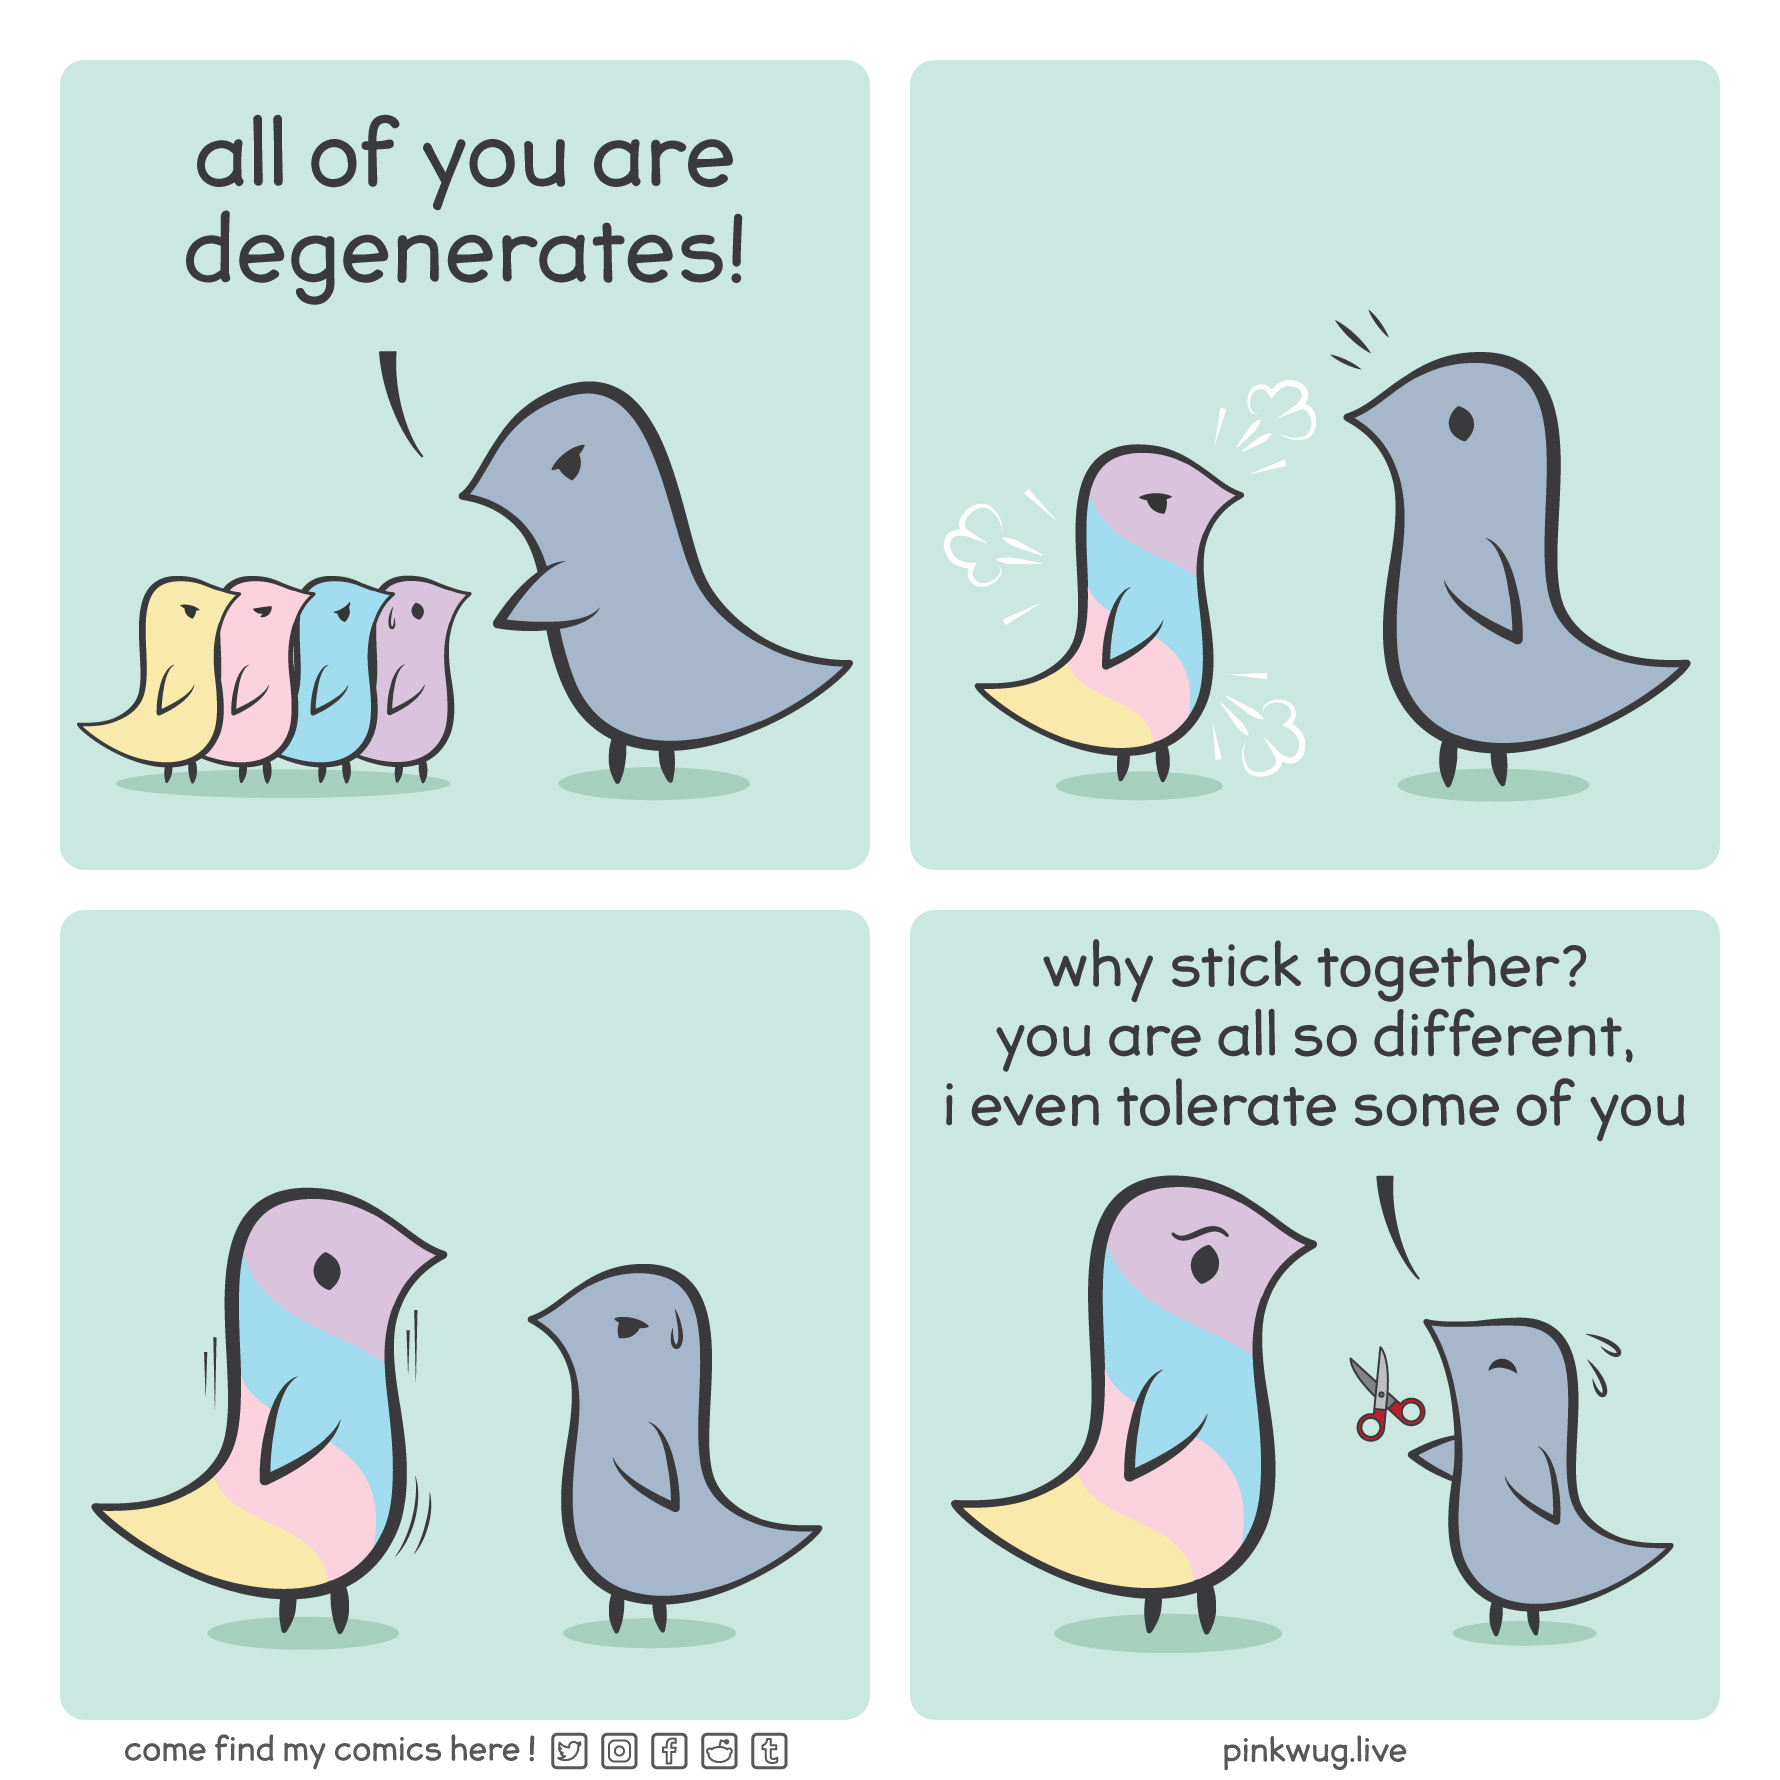 pinkwug comic: Panel 1: A grey wug stands over 4 wugs of different colors says "all of you are degenerates"

Panel 2: The 4 wugs merge into a bigger multicolor wug to the surprise of the grey wug

Panel 3: The multicolor wug grows, the grey wug looks worried

Panel 4: The multicolor wug is now bigger than the grey wug. The grey wug tries to hand it a scissor and says worried: "why stick together? you are all so different, i even tolerate some of you"